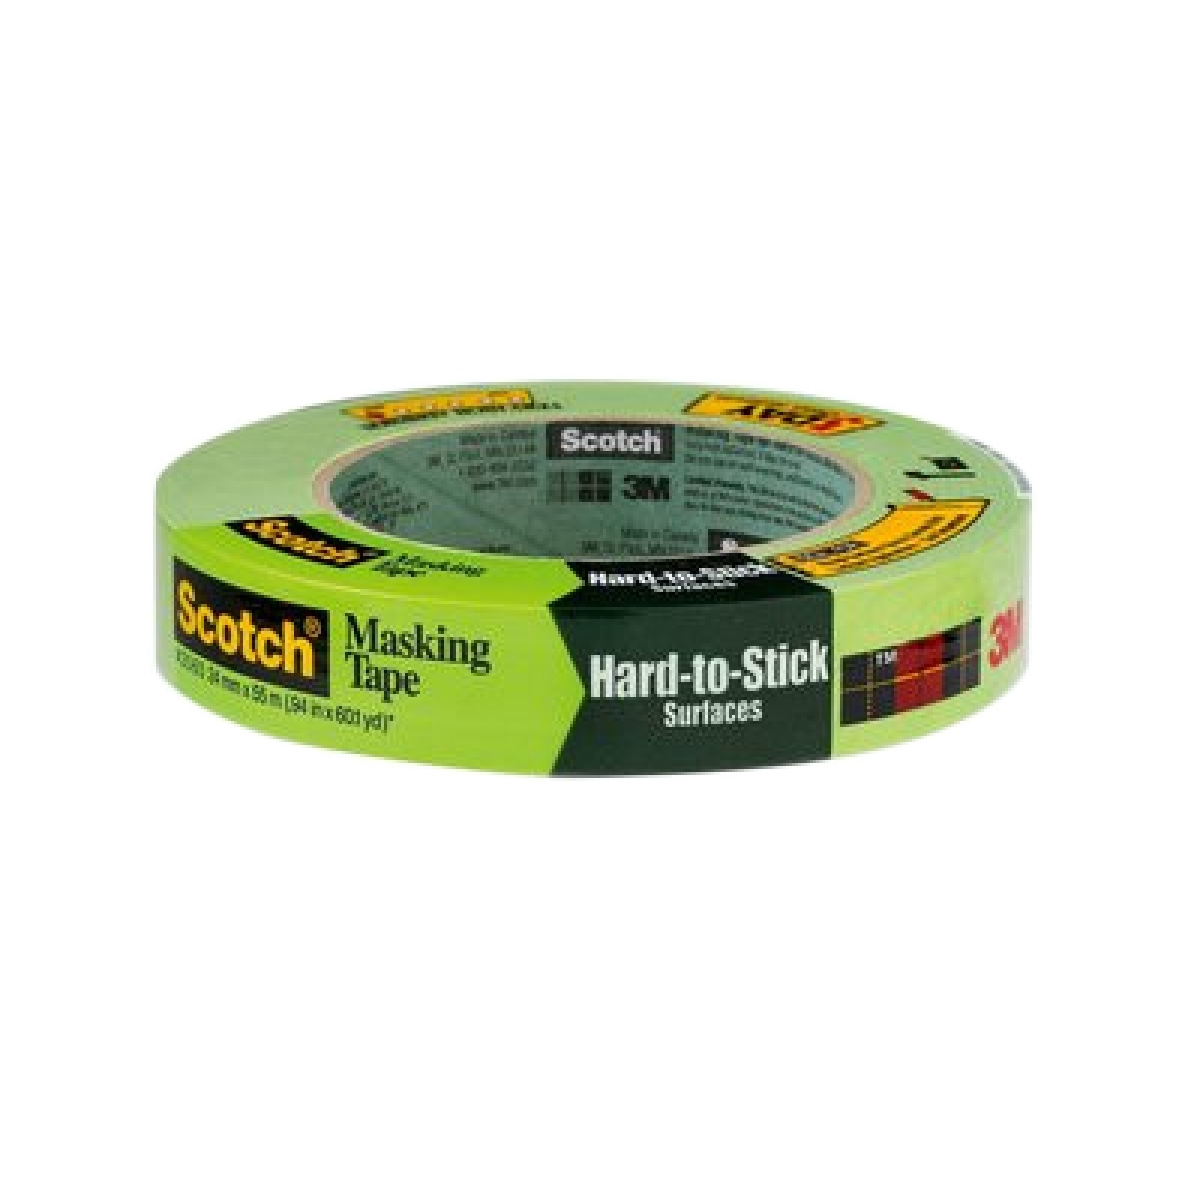 3m Scotch Masking Tape for Hard-to-Stick Surfaces 2060